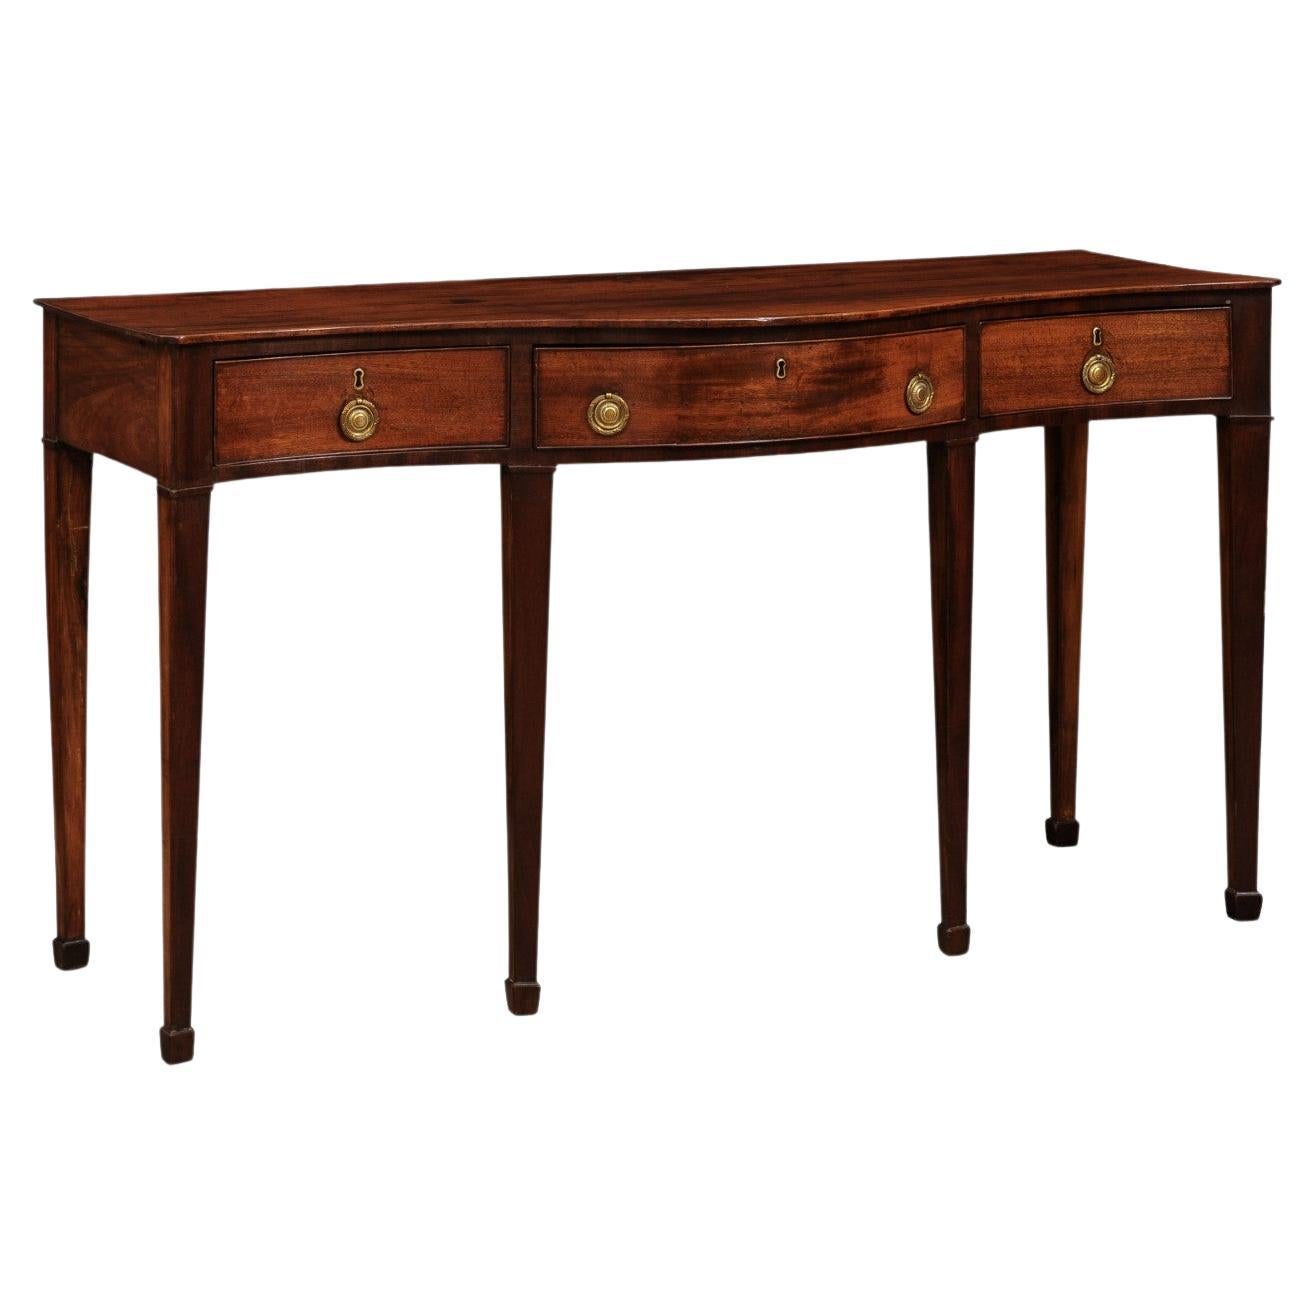 19th Century Mahogany Serving Serpentine Table with 3 Drawers For Sale